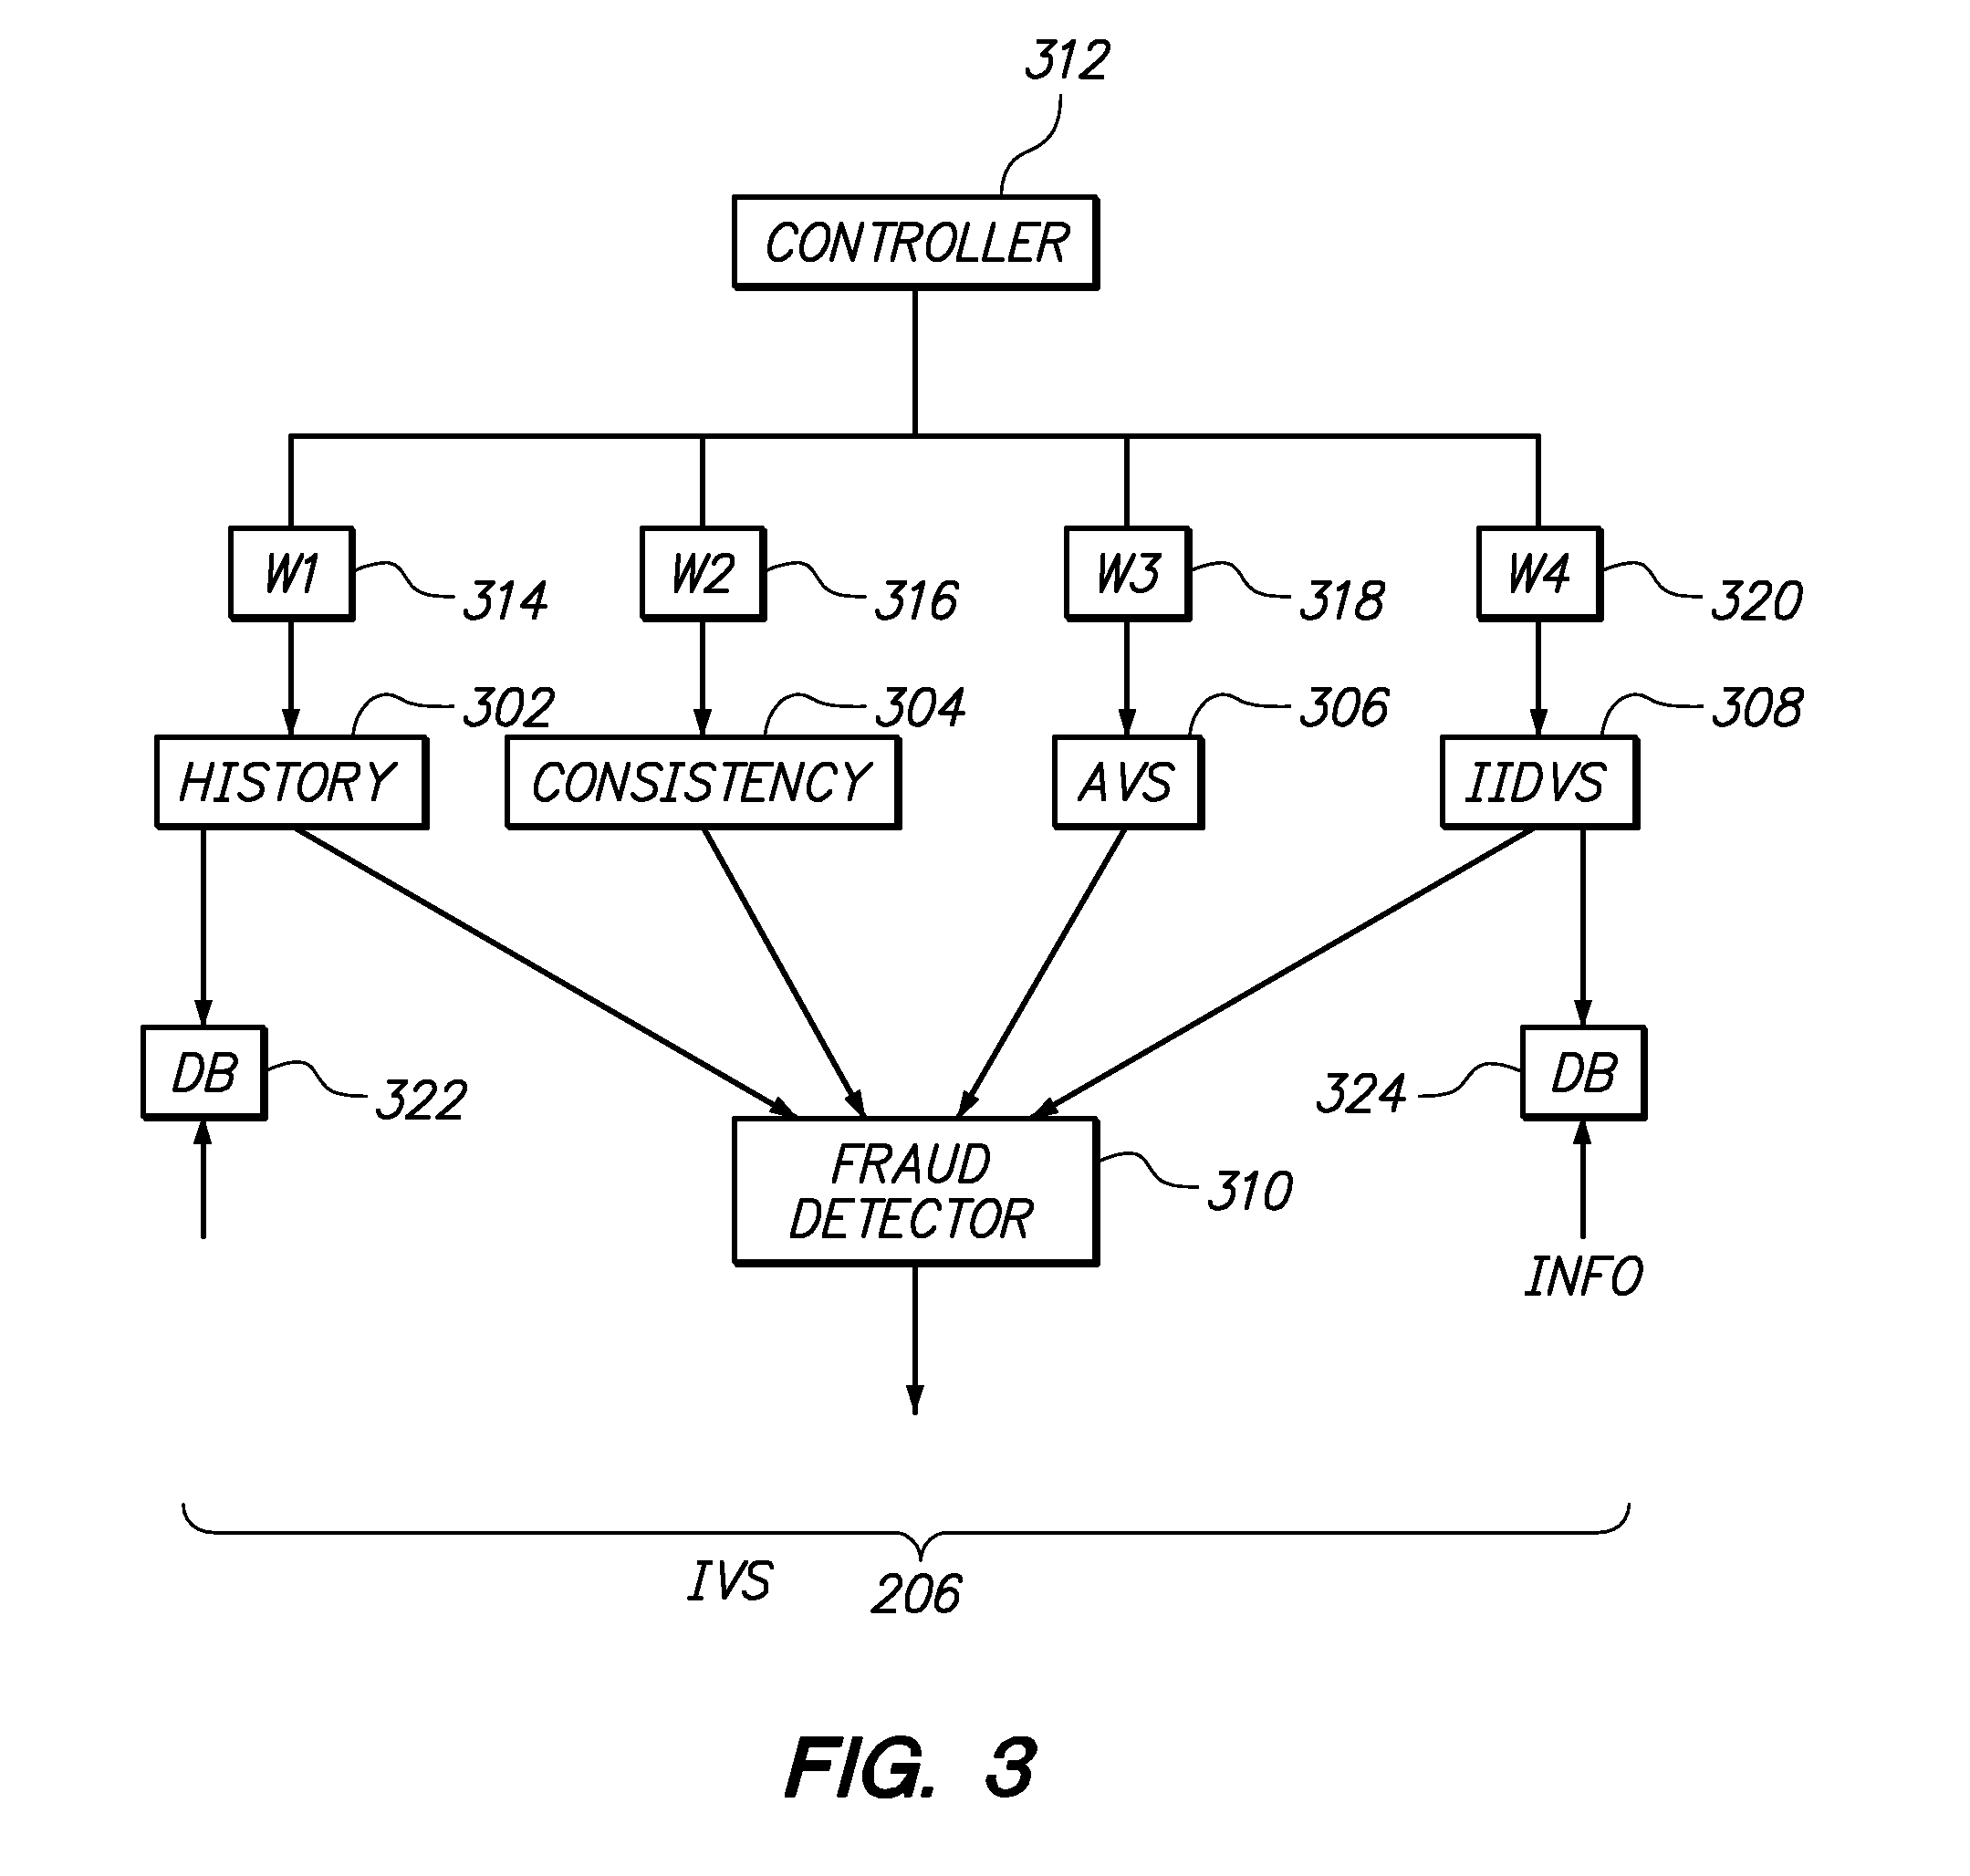 Method and Apparatus for Evaluating Fraud Risk in an Electronic Commerce Transaction